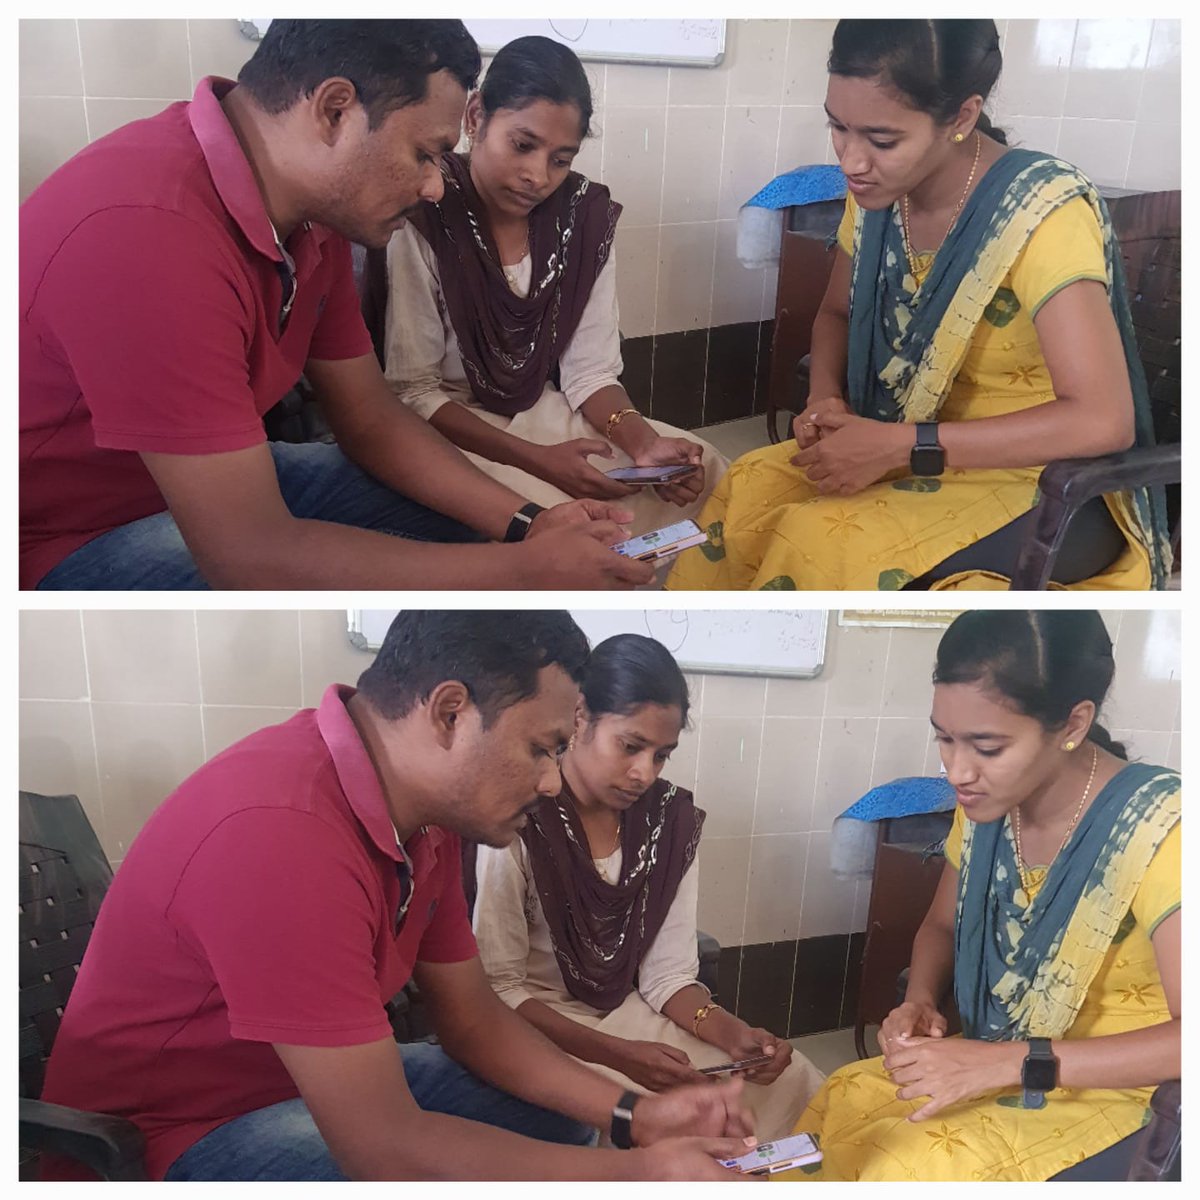 Sir on date.13.03.2023 PHC-Mangapet area Kamalapuram, Mookamamidi Health and Wellness Center MLHP informed login ID password on #Nikshaya website and explained the method of patient enrollment training and #DBT, #Comorbidity, #ContactTracing details entry. sir